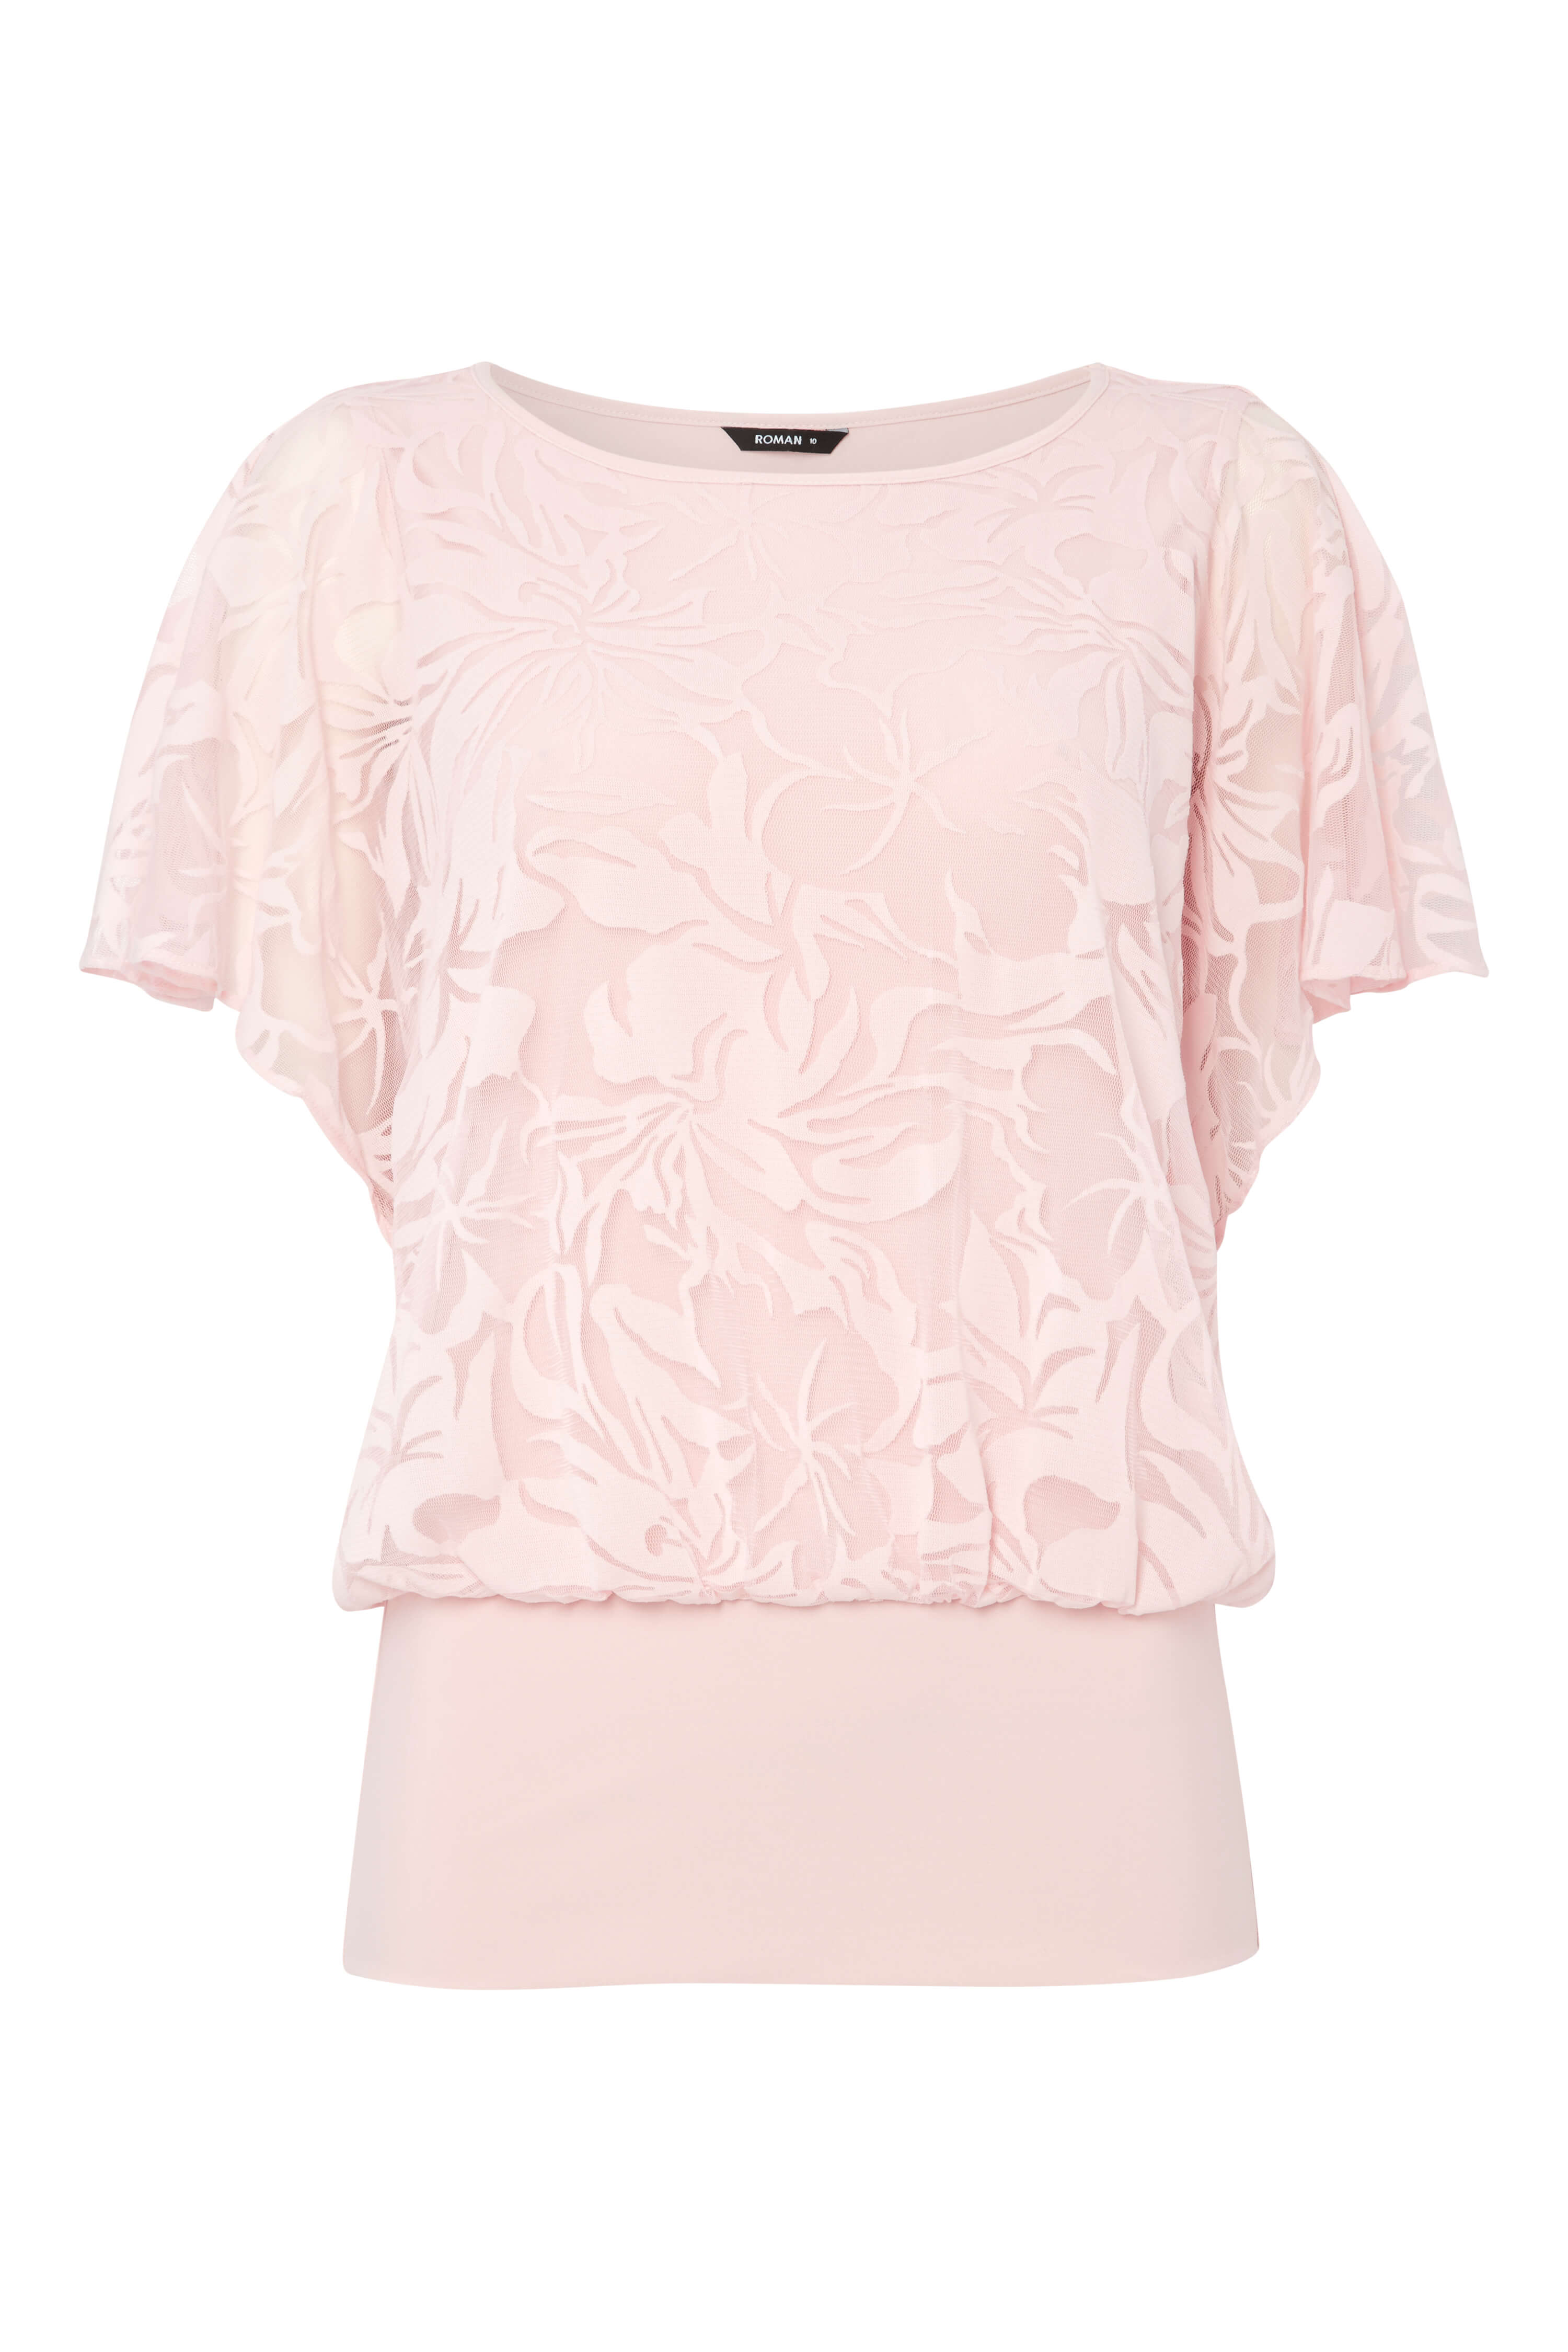 PINK Floral Double Layer Burnout Print Top, Image 5 of 5